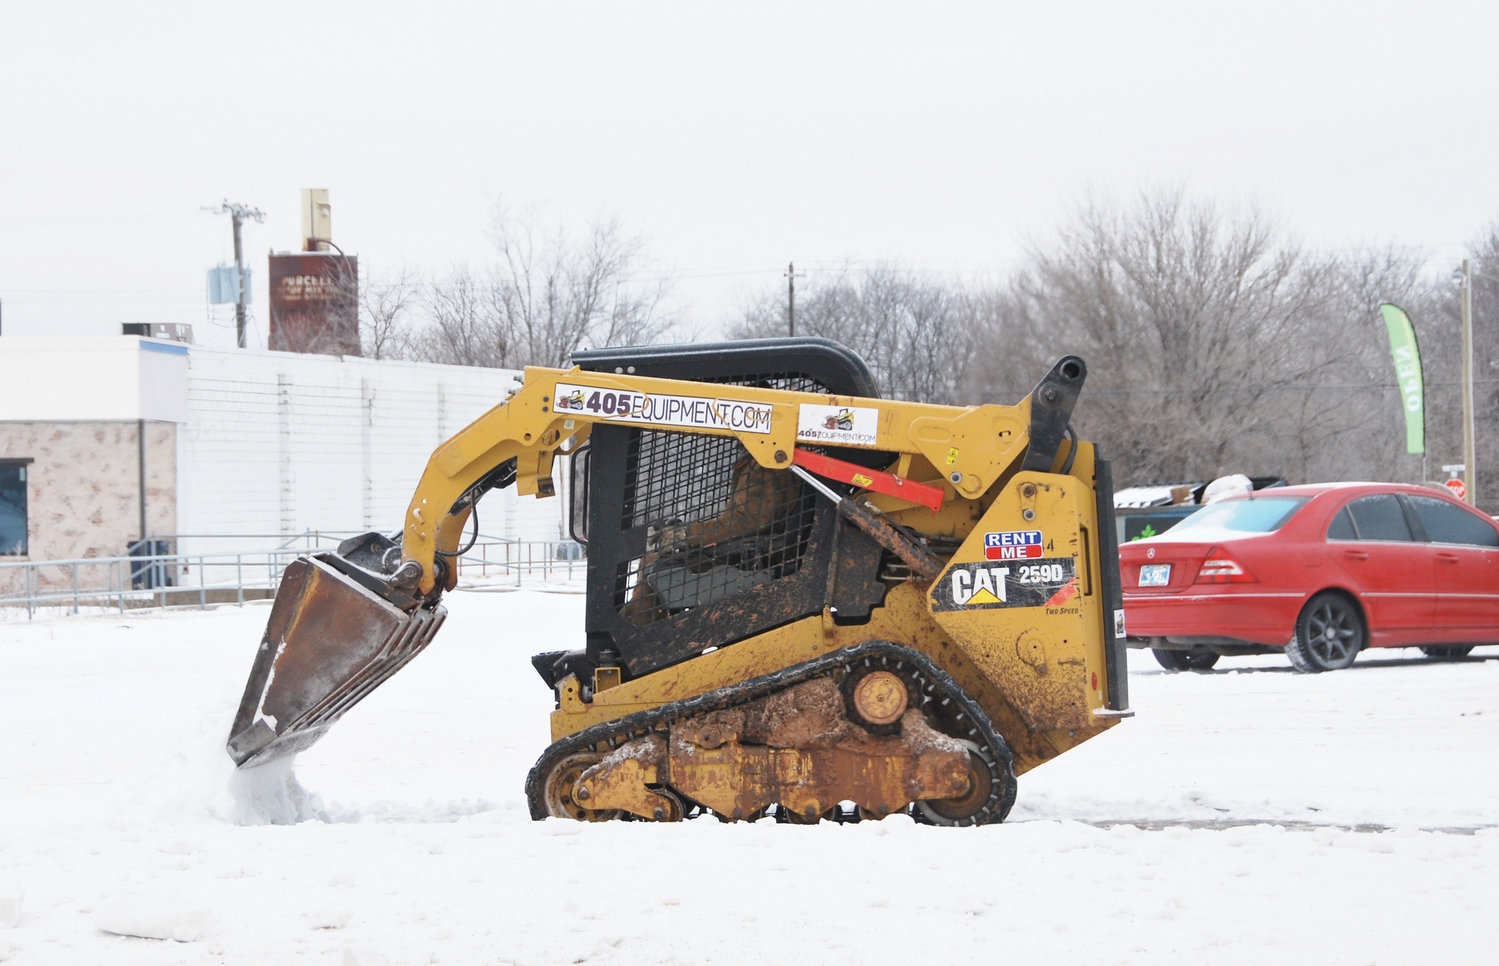 Bobcats were handy equipment last week to clear away ice in parking lots after the two-day, two-wave ice and sleet storm that paralyzed the area canceling schools and other events.